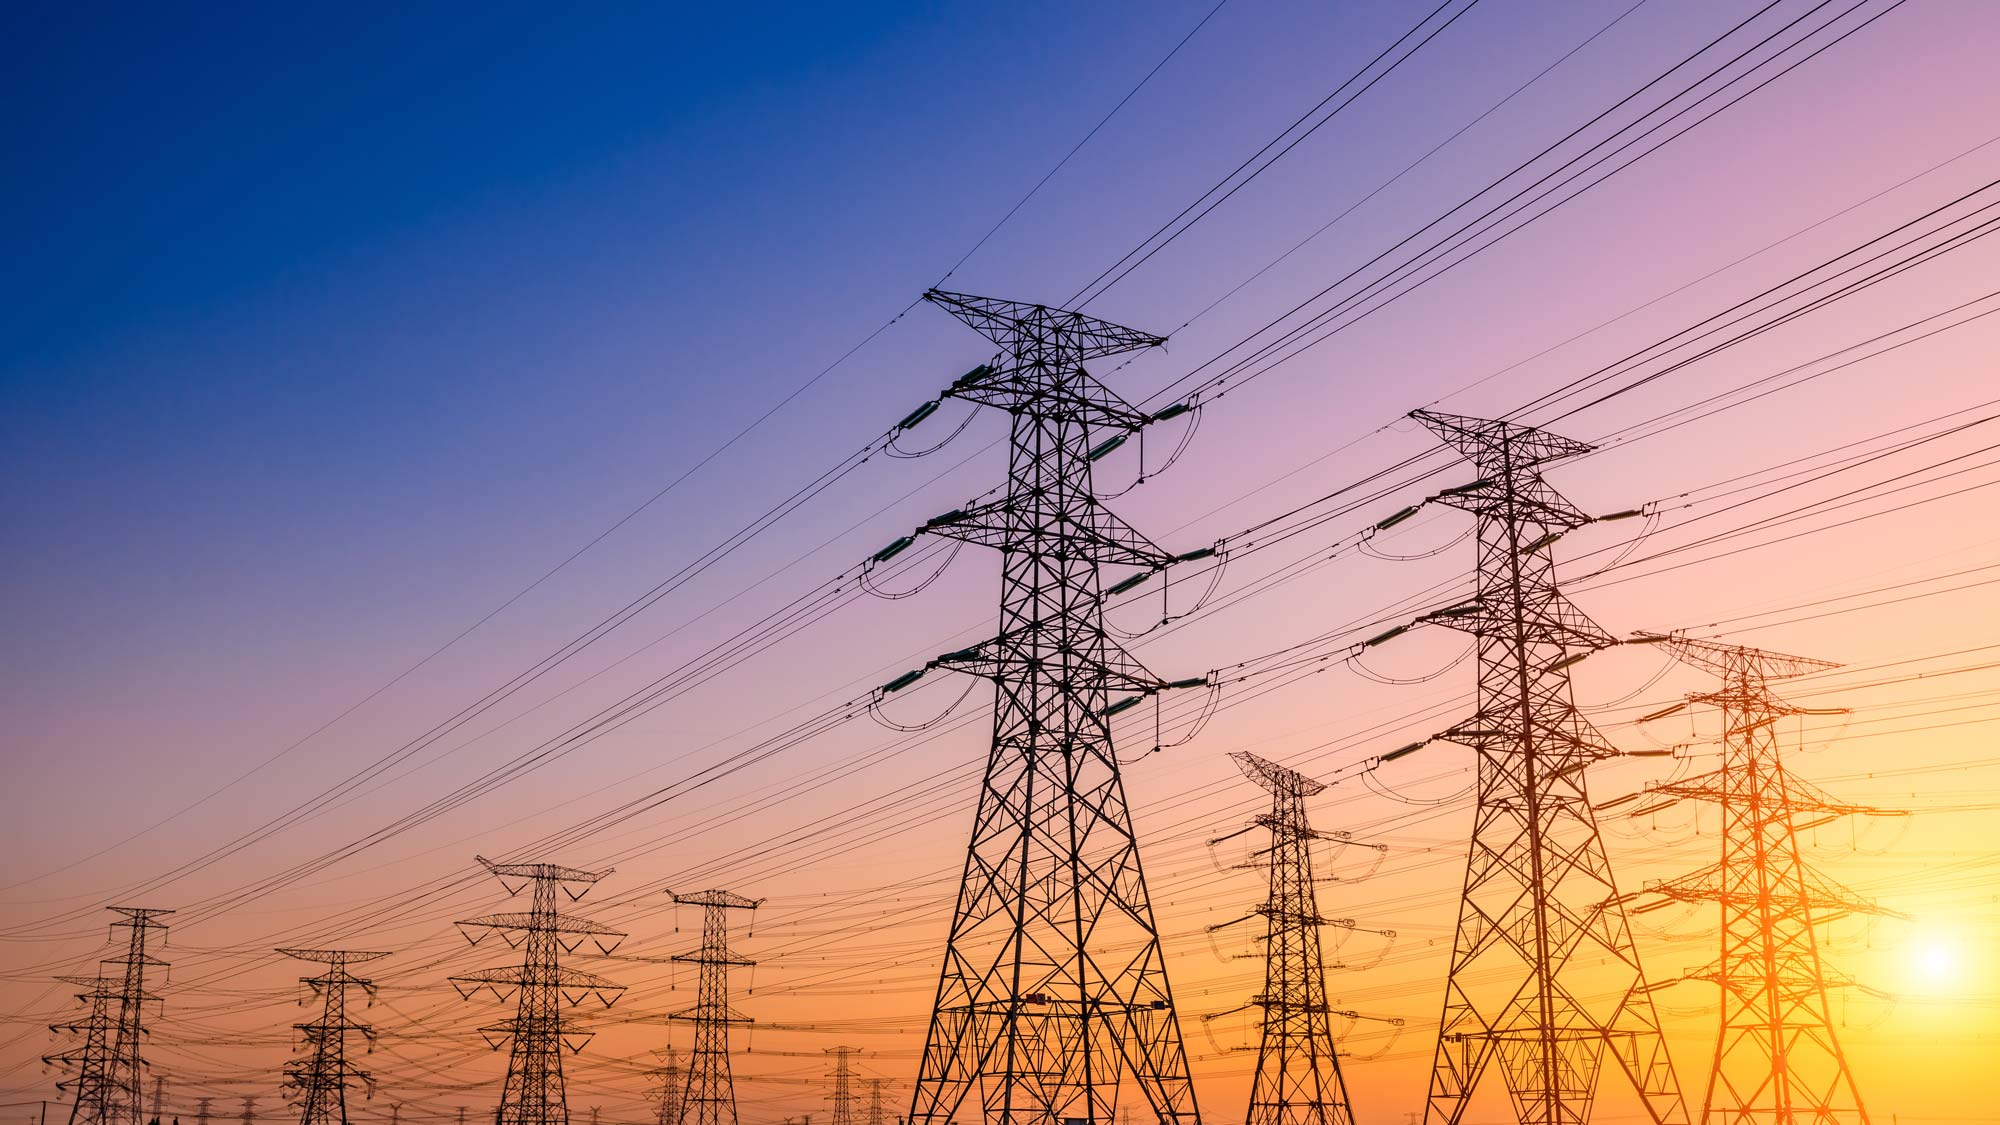 High voltage electricity transmission power lines at sunset